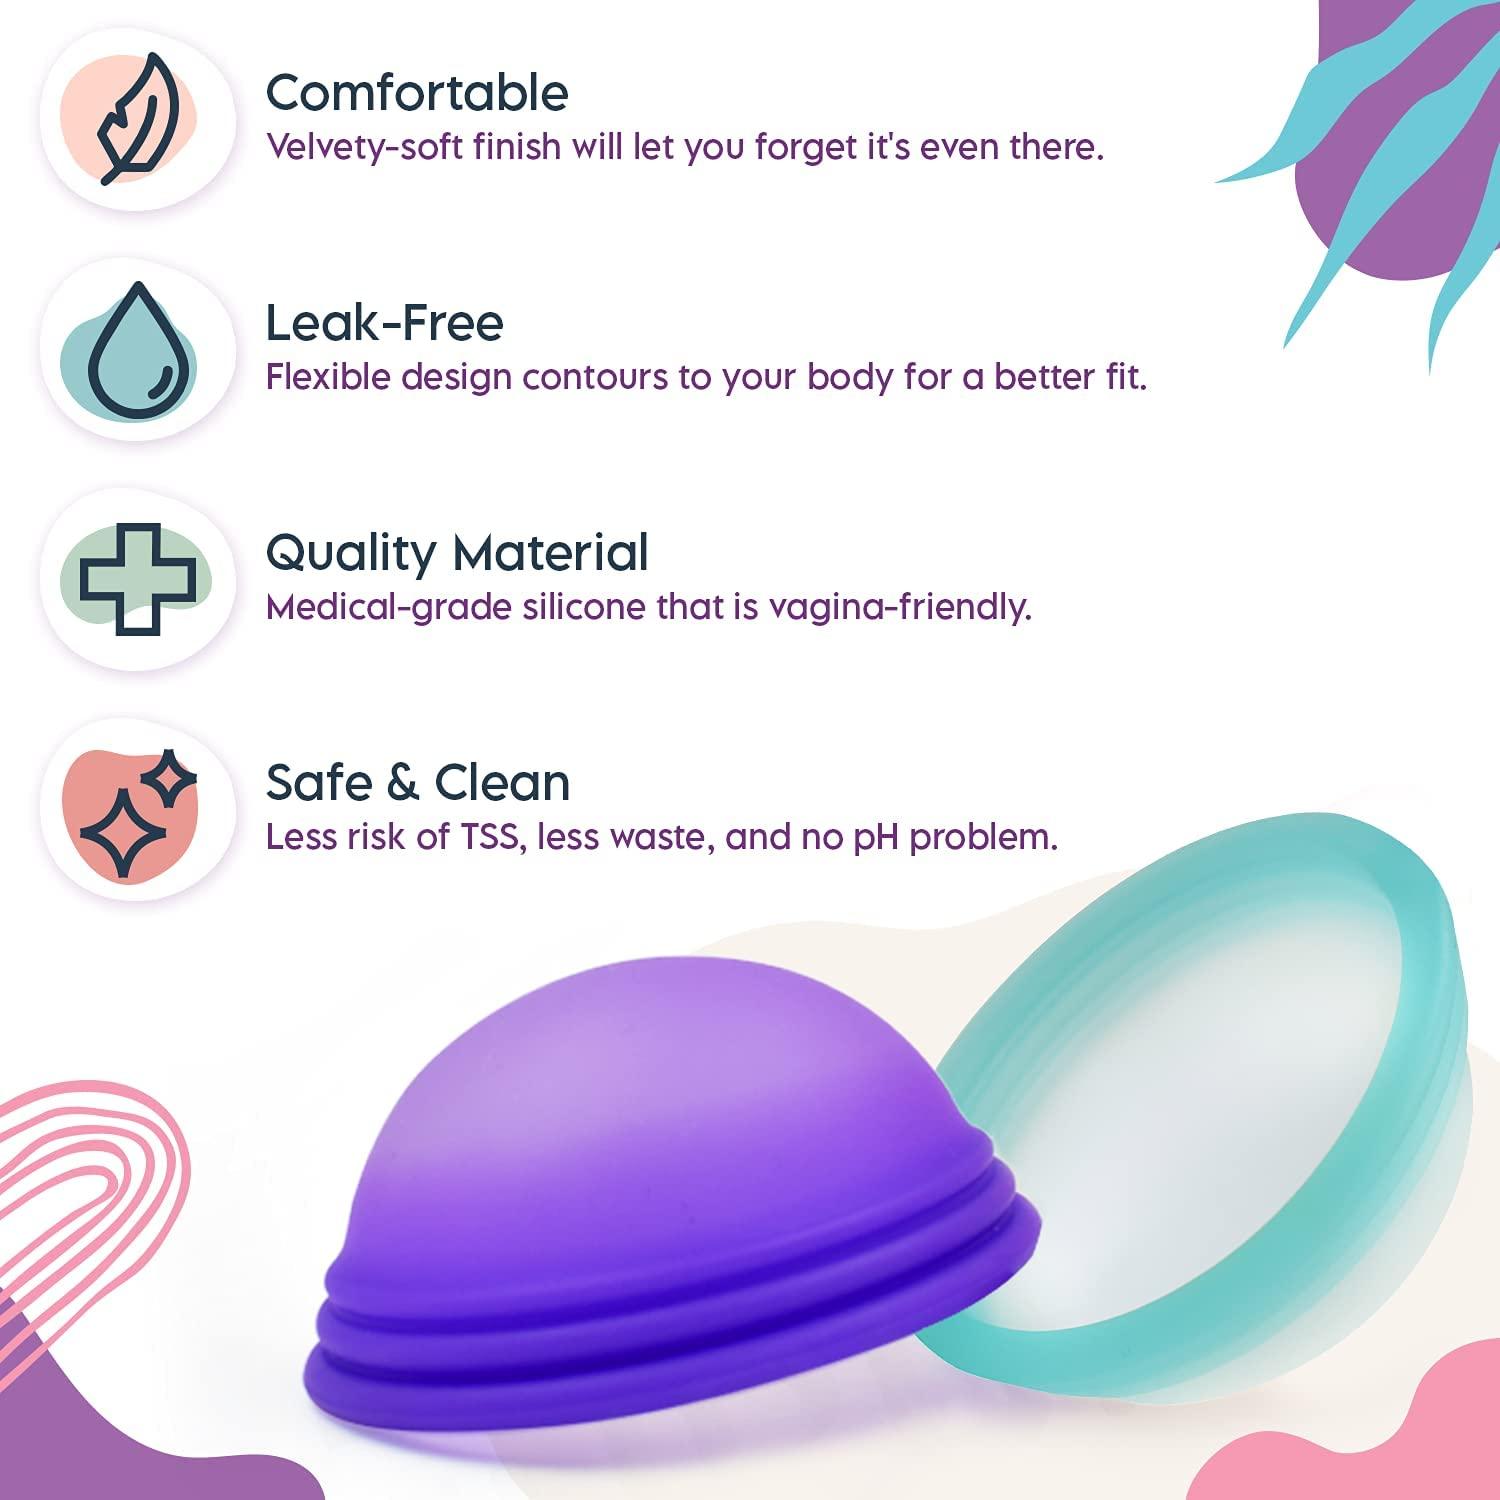 Ecoblossom Reusable Menstrual Disc - Small Menstrual Cup - Soft Period Disc  for Women Designed with Flexible, Medical-Grade Silicone Period Cup